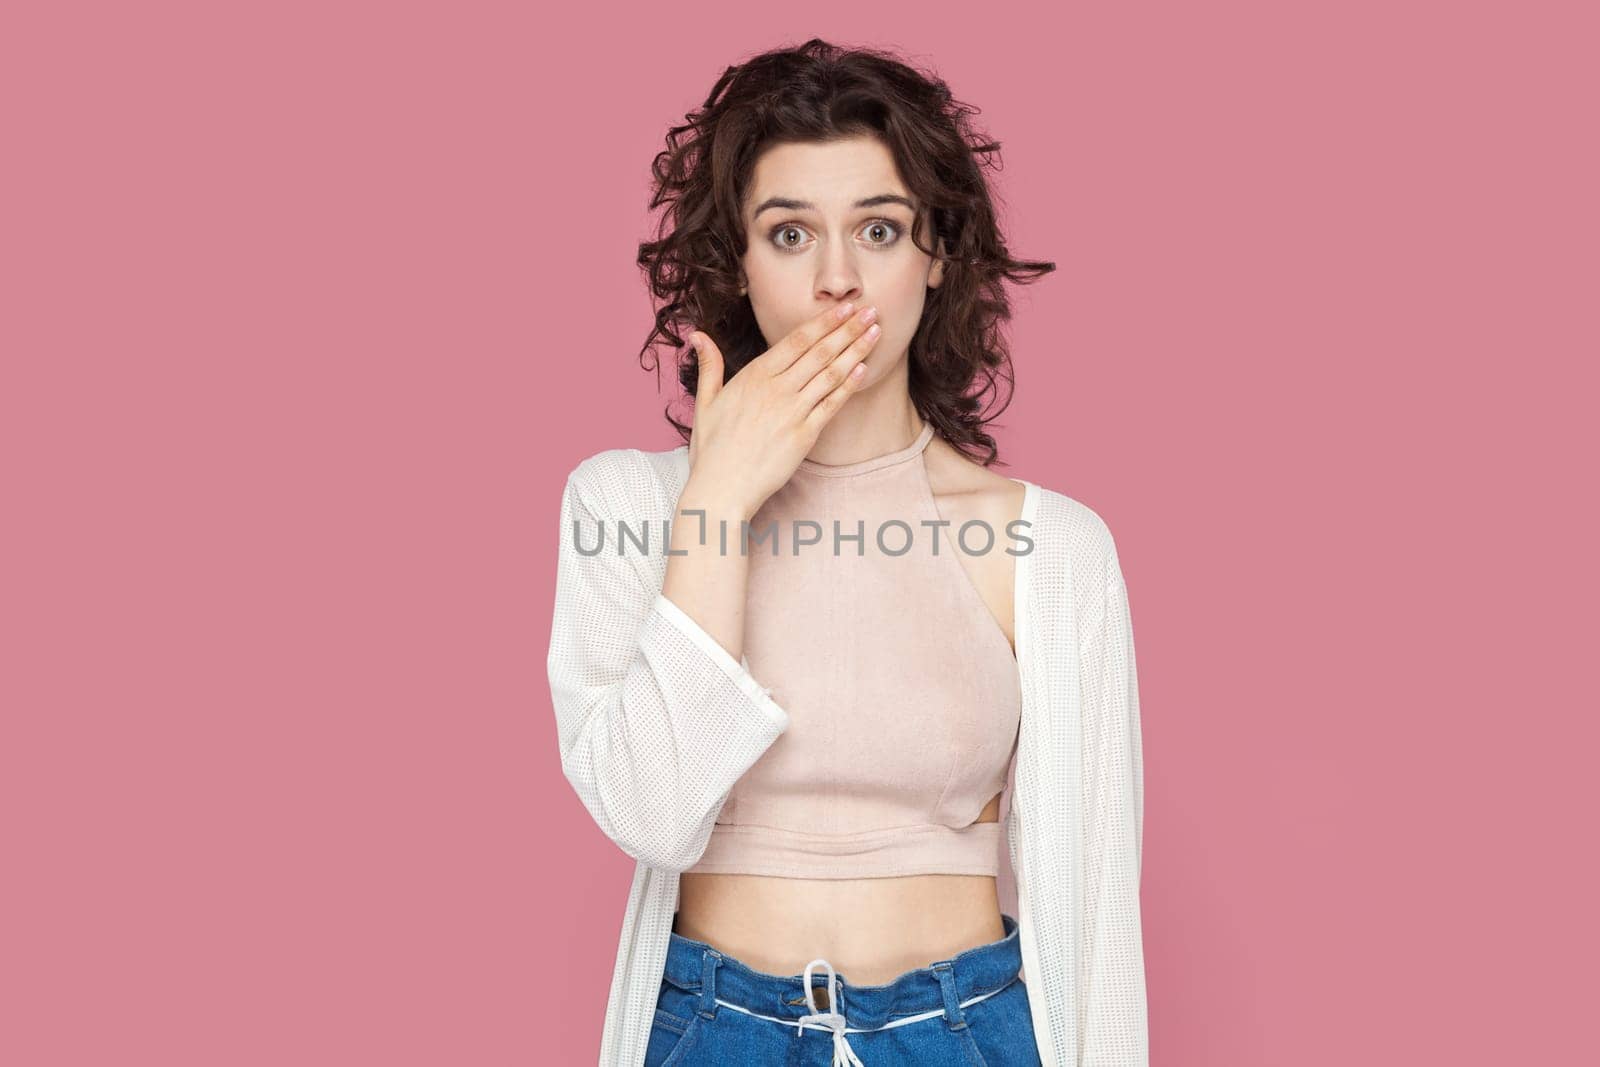 Portrait of shocked attractive woman with curly hair wearing casual style outfit covering mouth with palm, saying I won't tell anyone. Indoor studio shot isolated on pink background.